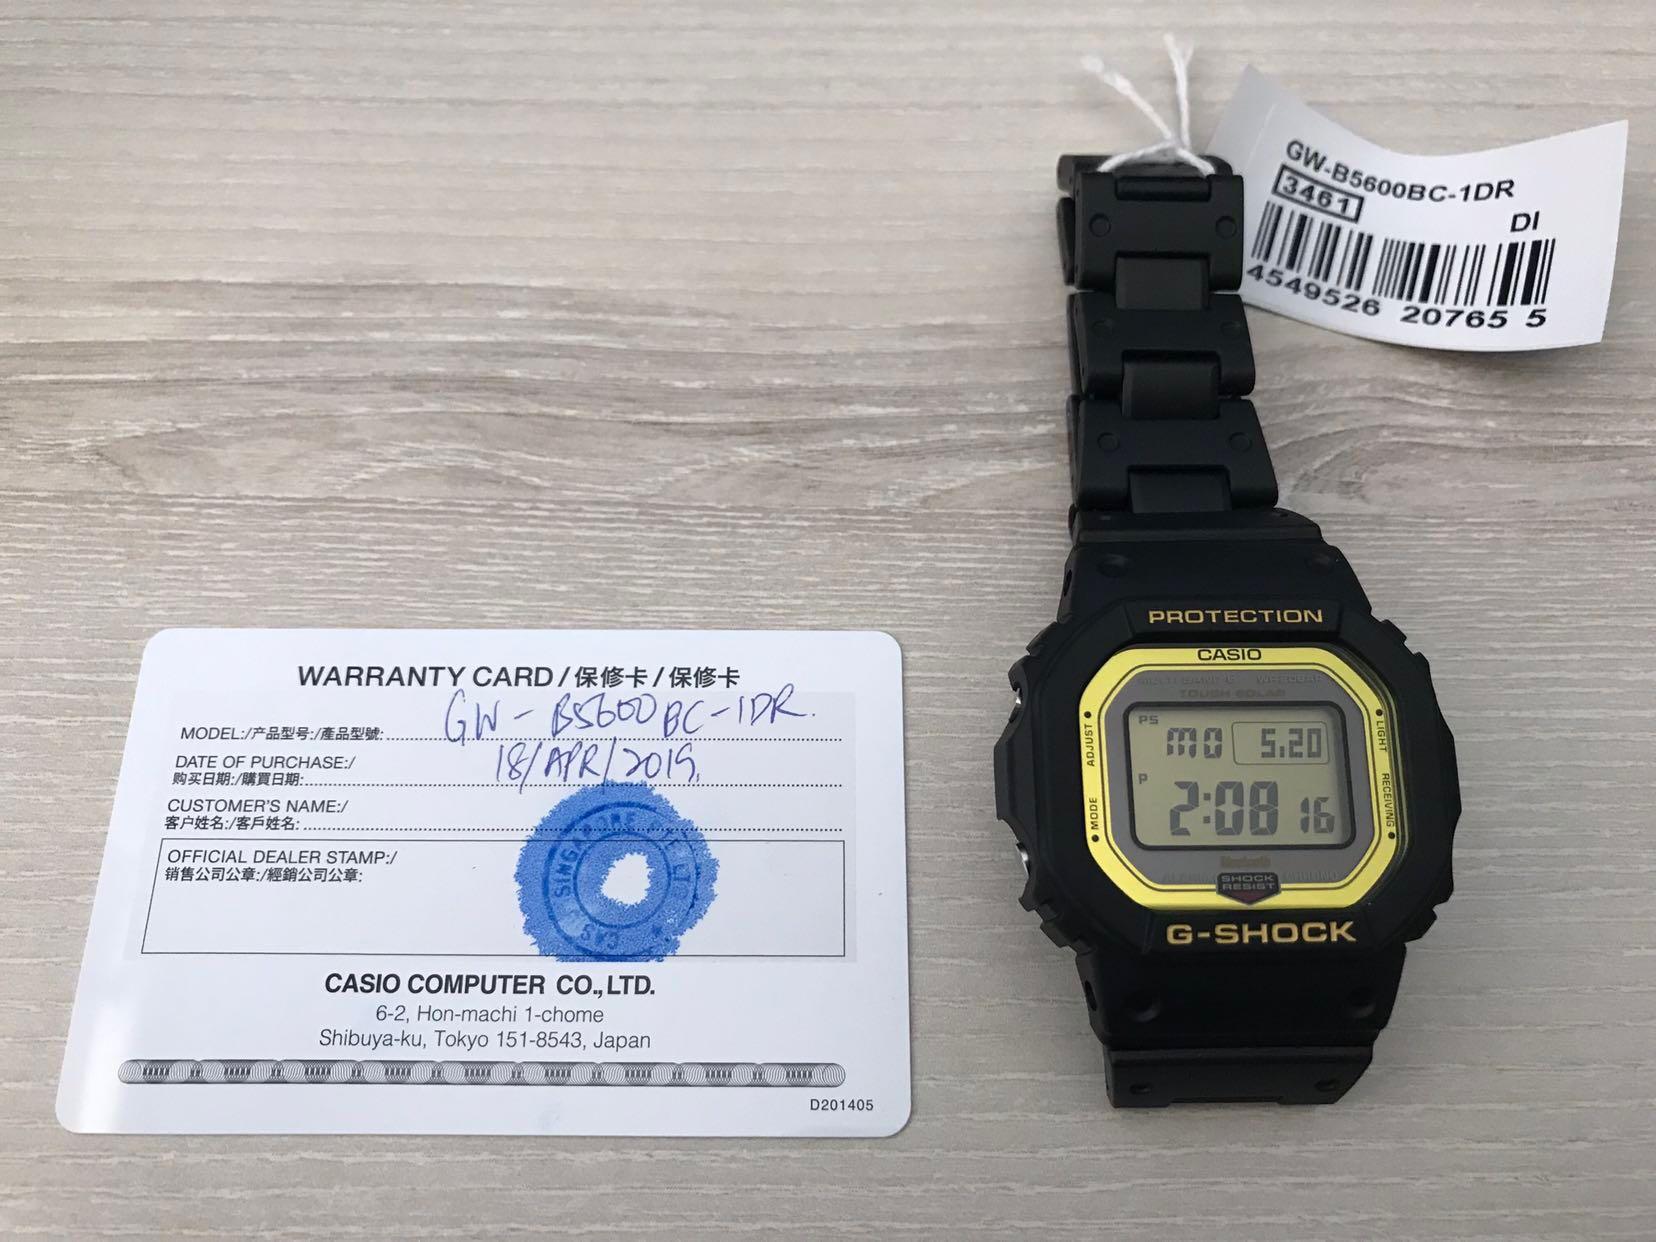 Gshock Gw B5600bc 1jf Free Alteration At Casio Singapore Men S Fashion Watches On Carousell